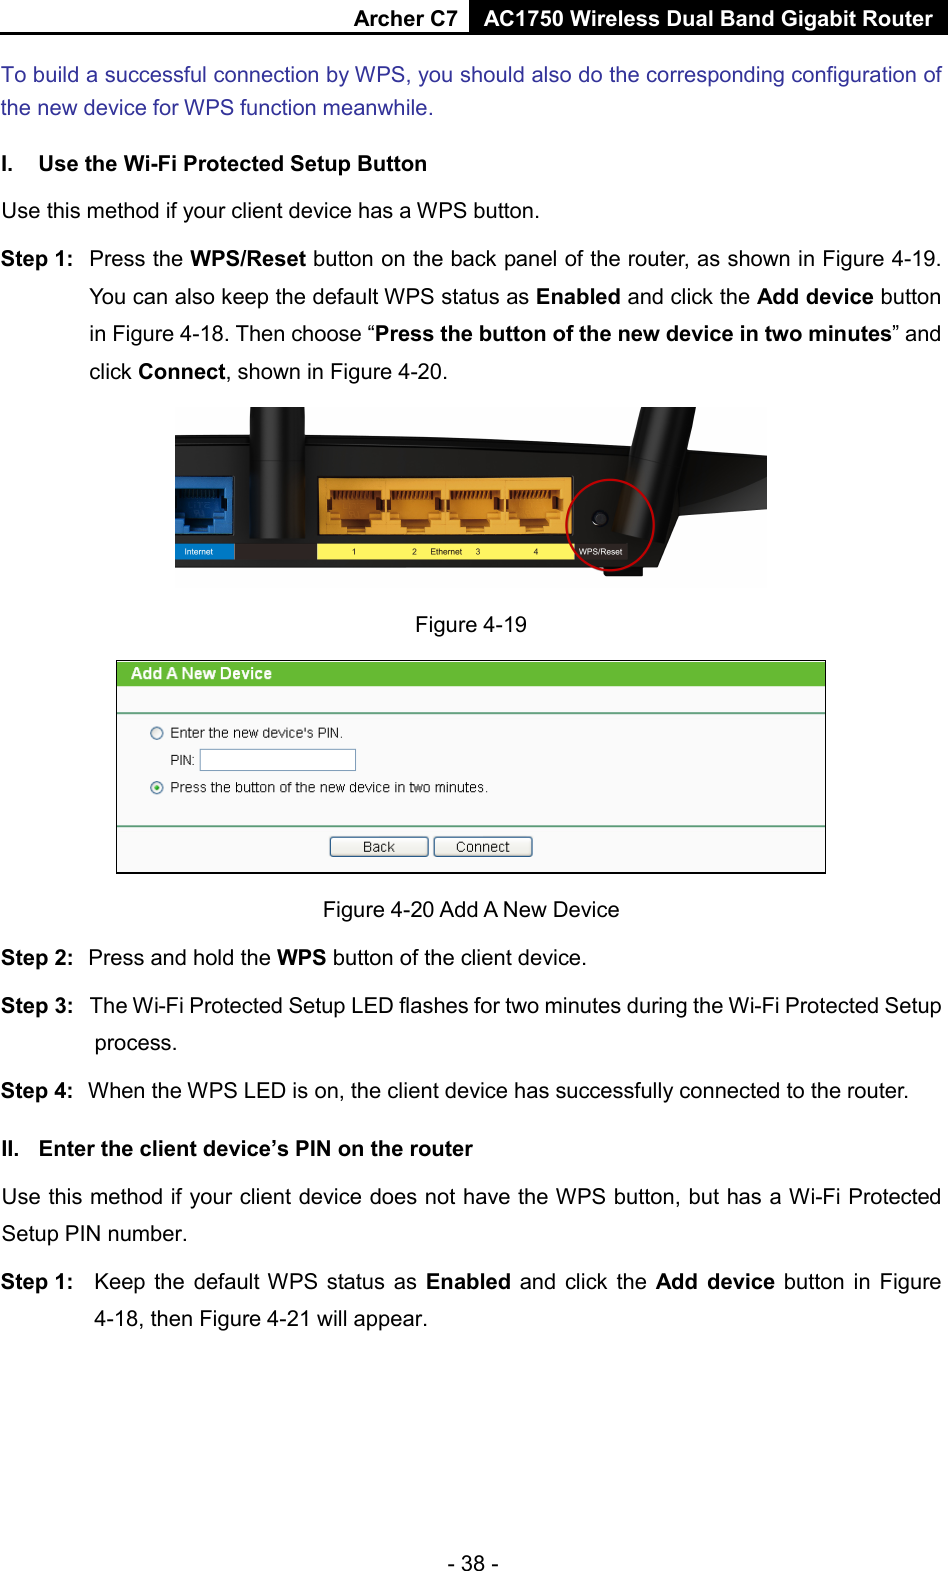 Archer C7 AC1750 Wireless Dual Band Gigabit Router  - 38 - To build a successful connection by WPS, you should also do the corresponding configuration of the new device for WPS function meanwhile. I. Use the Wi-Fi Protected Setup Button Use this method if your client device has a WPS button. Step 1: Press the WPS/Reset button on the back panel of the router, as shown in Figure 4-19. You can also keep the default WPS status as Enabled and click the Add device button in Figure 4-18. Then choose “Press the button of the new device in two minutes” and click Connect, shown in Figure 4-20.  Figure 4-19  Figure 4-20 Add A New Device Step 2: Press and hold the WPS button of the client device.   Step 3: The Wi-Fi Protected Setup LED flashes for two minutes during the Wi-Fi Protected Setup process.   Step 4: When the WPS LED is on, the client device has successfully connected to the router.   II. Enter the client device’s PIN on the router Use this method if your client device does not have the WPS button, but has a Wi-Fi Protected Setup PIN number. Step 1: Keep the default WPS  status as Enabled and click the Add device button in Figure 4-18, then Figure 4-21 will appear.   